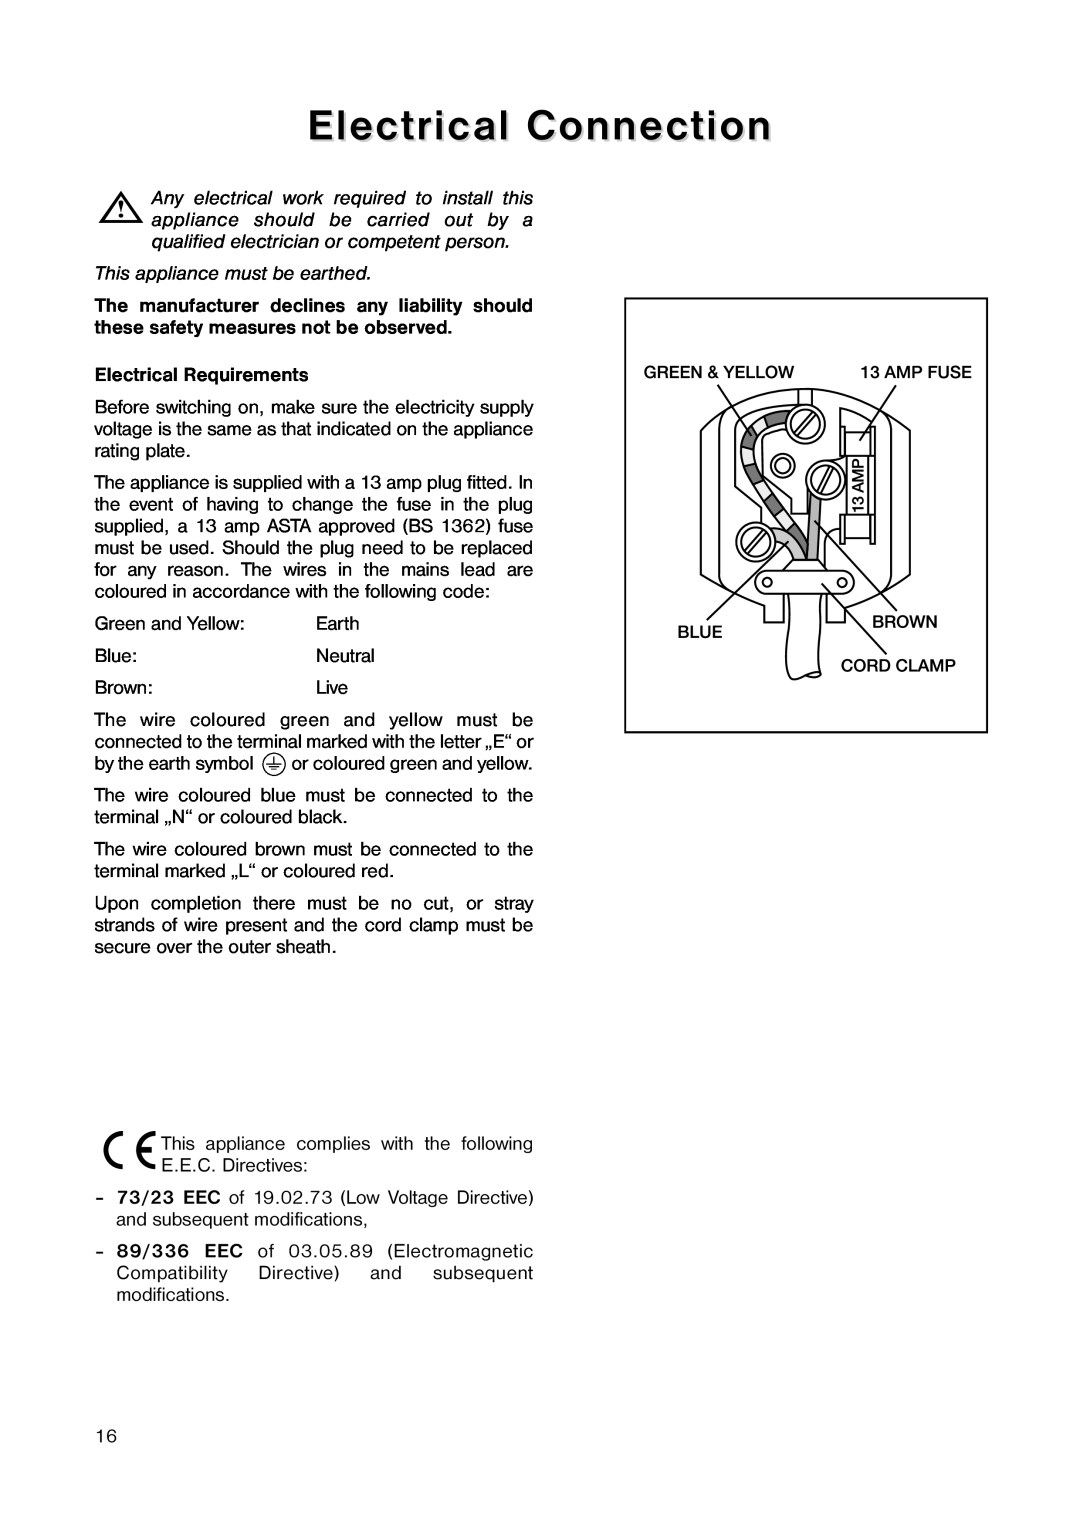 Electrolux ER 1643 T manual Electrical Connection, This appliance must be earthed, Electrical Requirements 